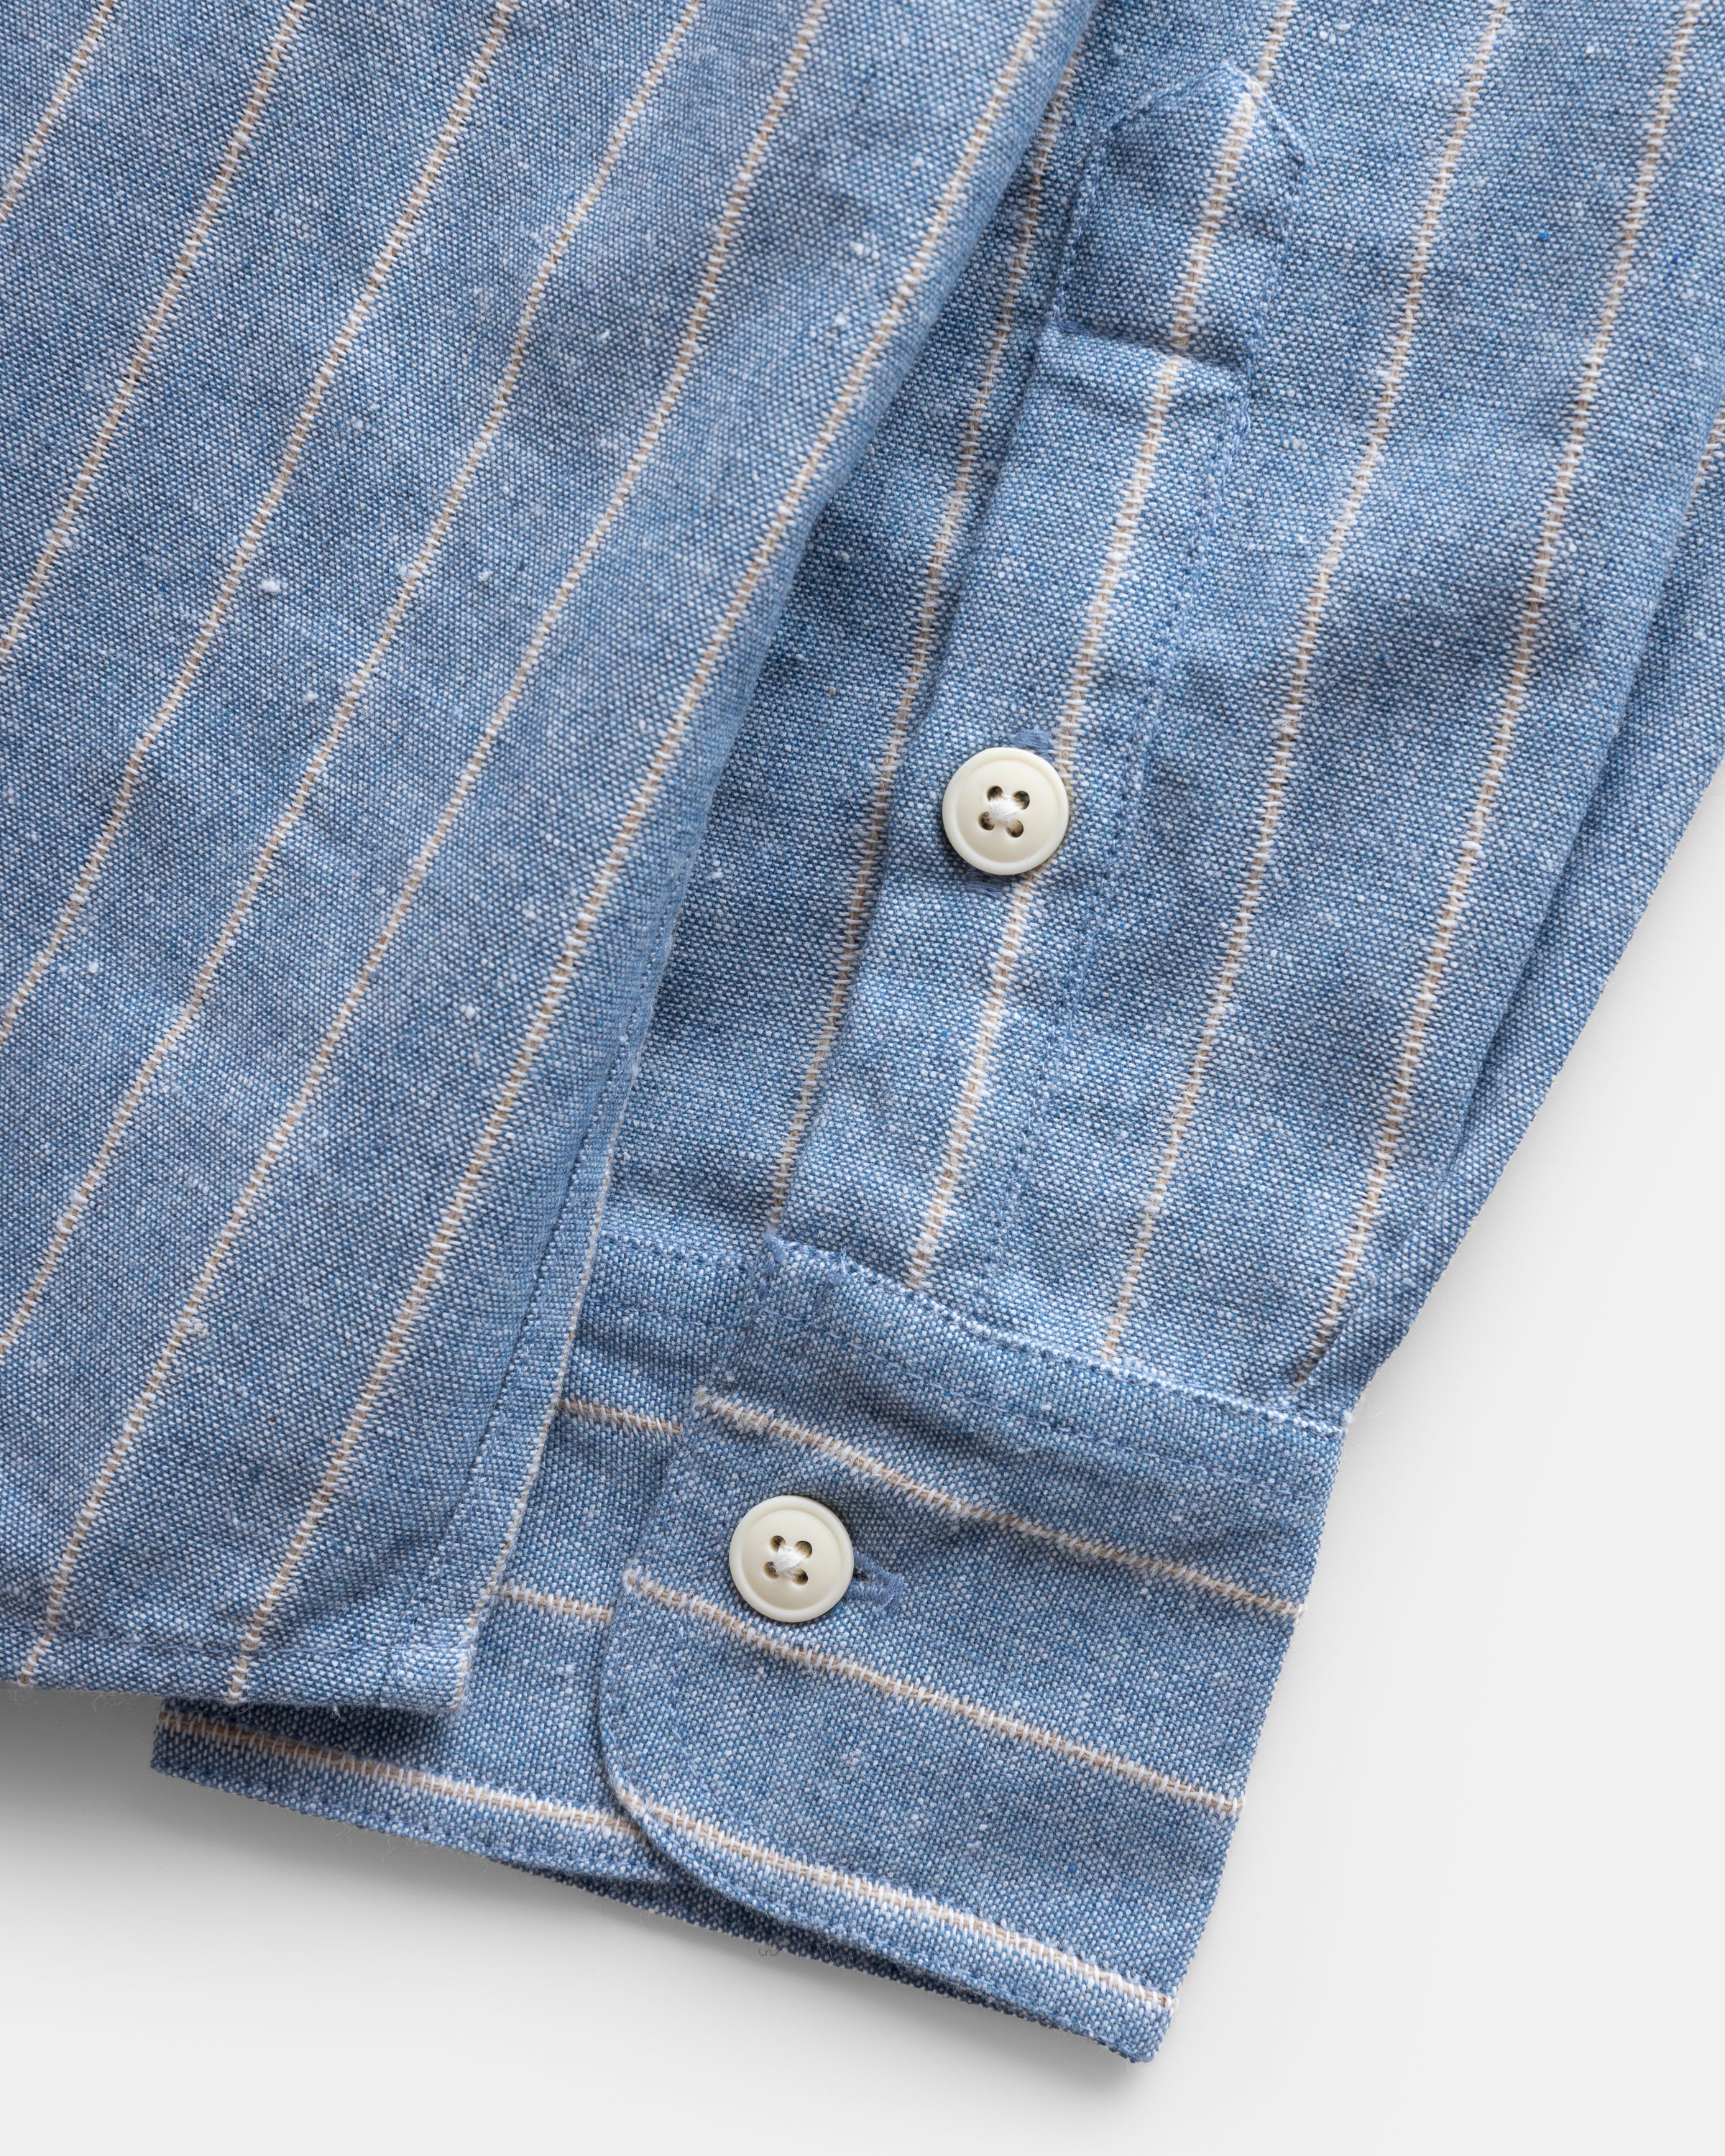 WOLF BUTTON-DOWN SHIRT - CLEARWEATHER BLUE / WHITE / TAN TWISTED STRIPE SUMMER COTTON / LINEN OXFORD